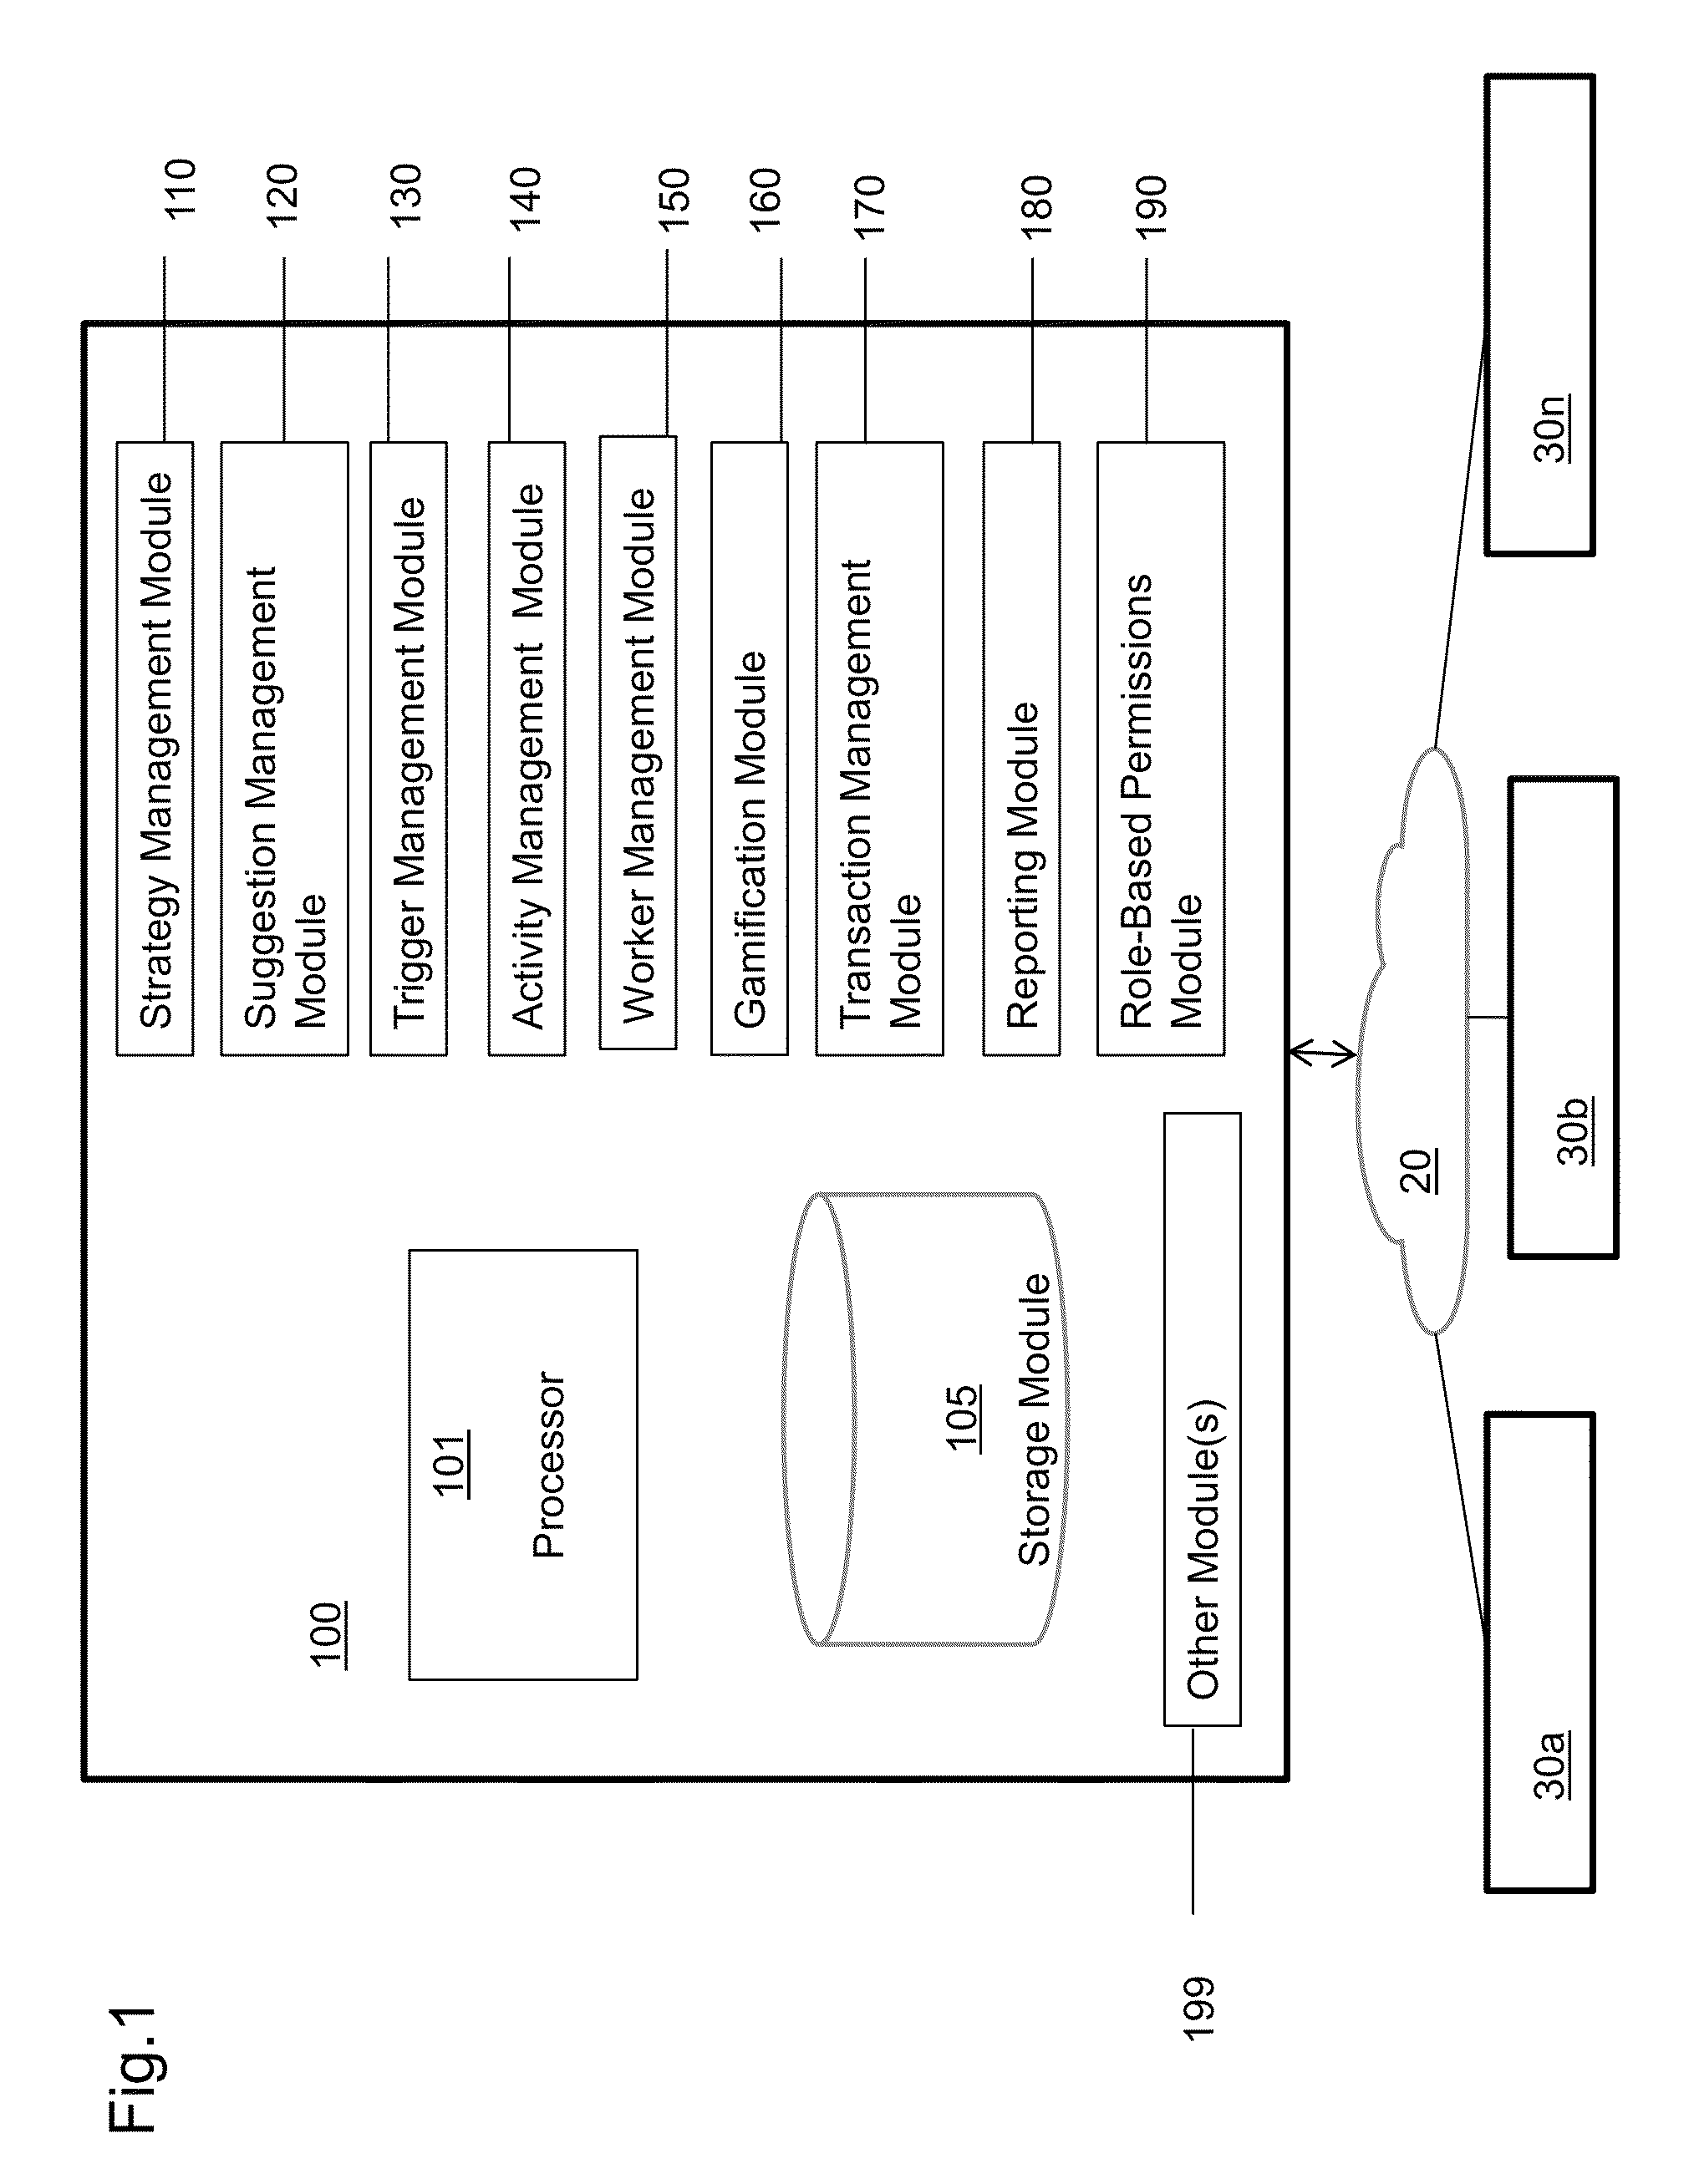 System and method for managing system-level workflow strategy and individual workflow activity